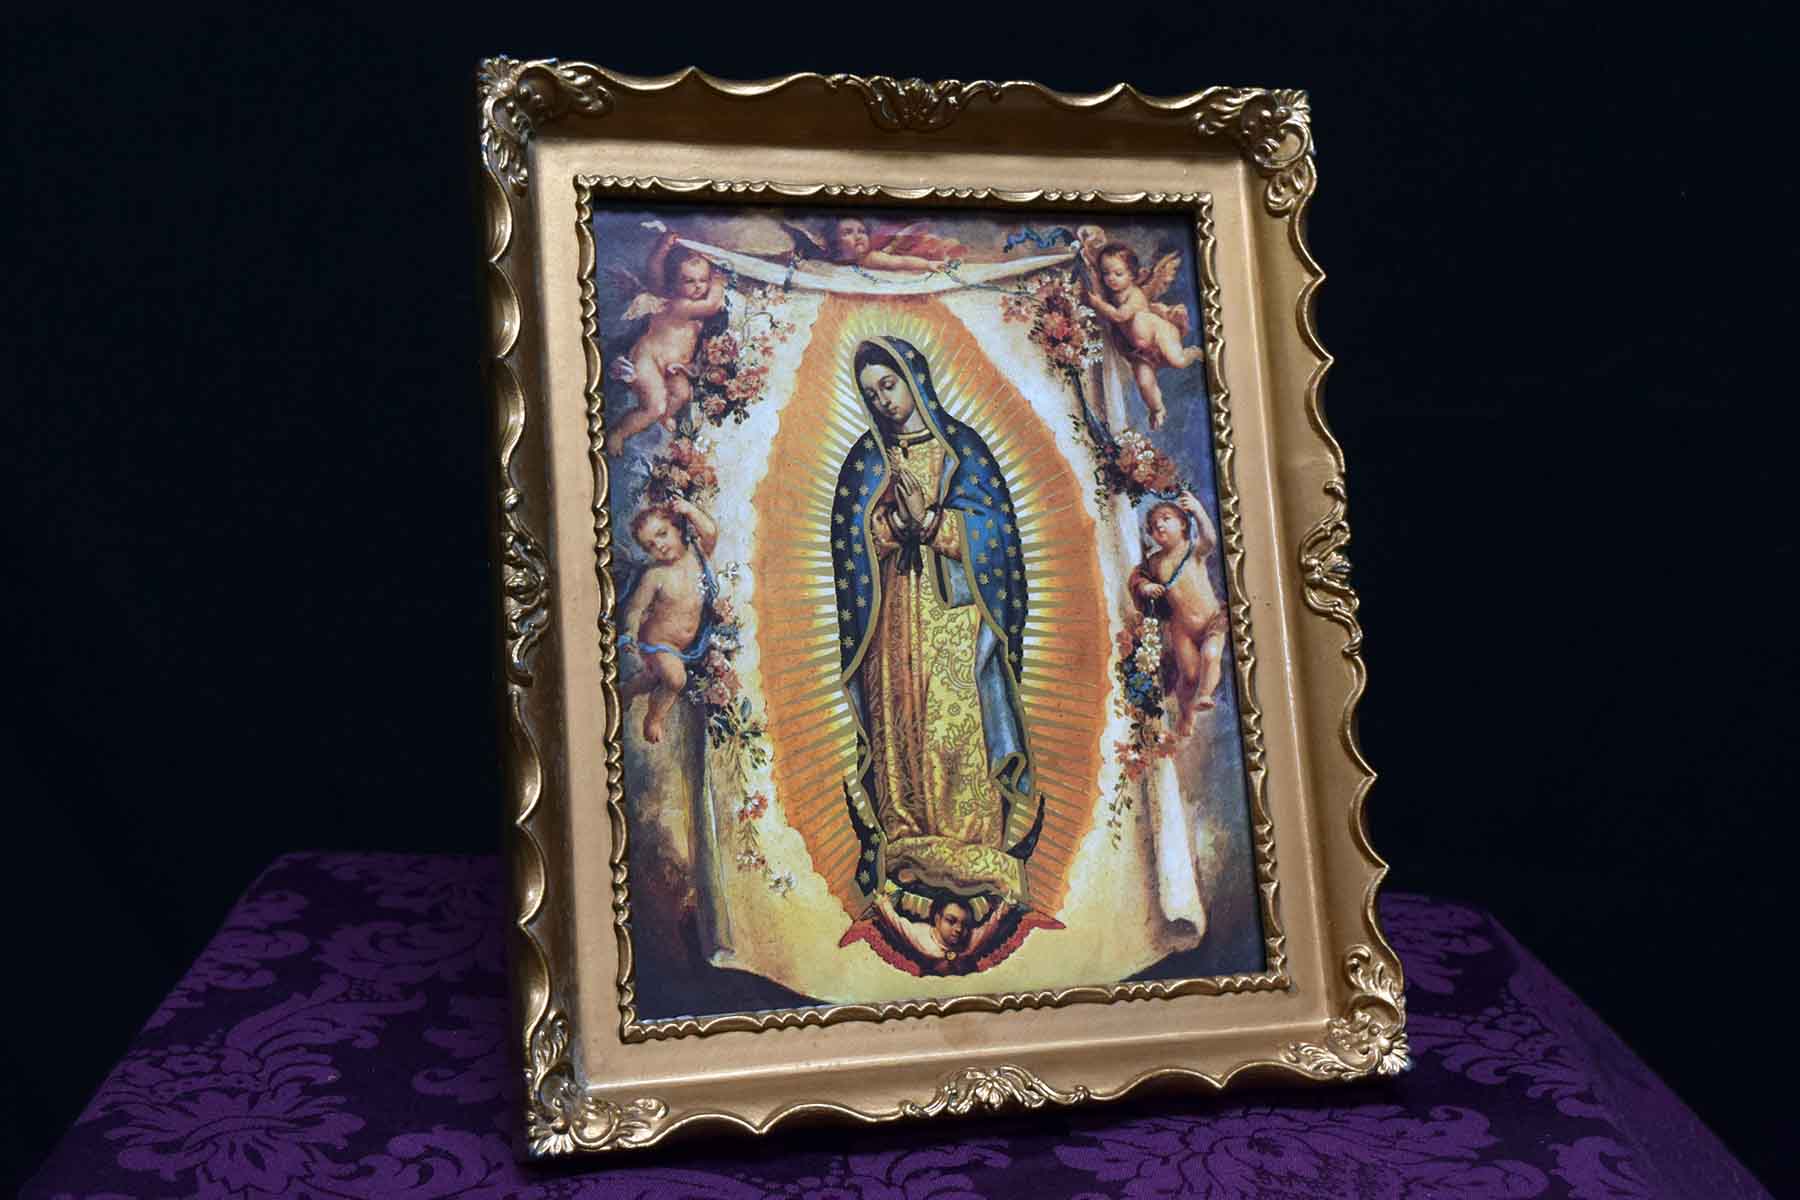 R13_Our_Lady_of_Guadalupe_8x10_framed_print_-_CCMLpic-R.jpg